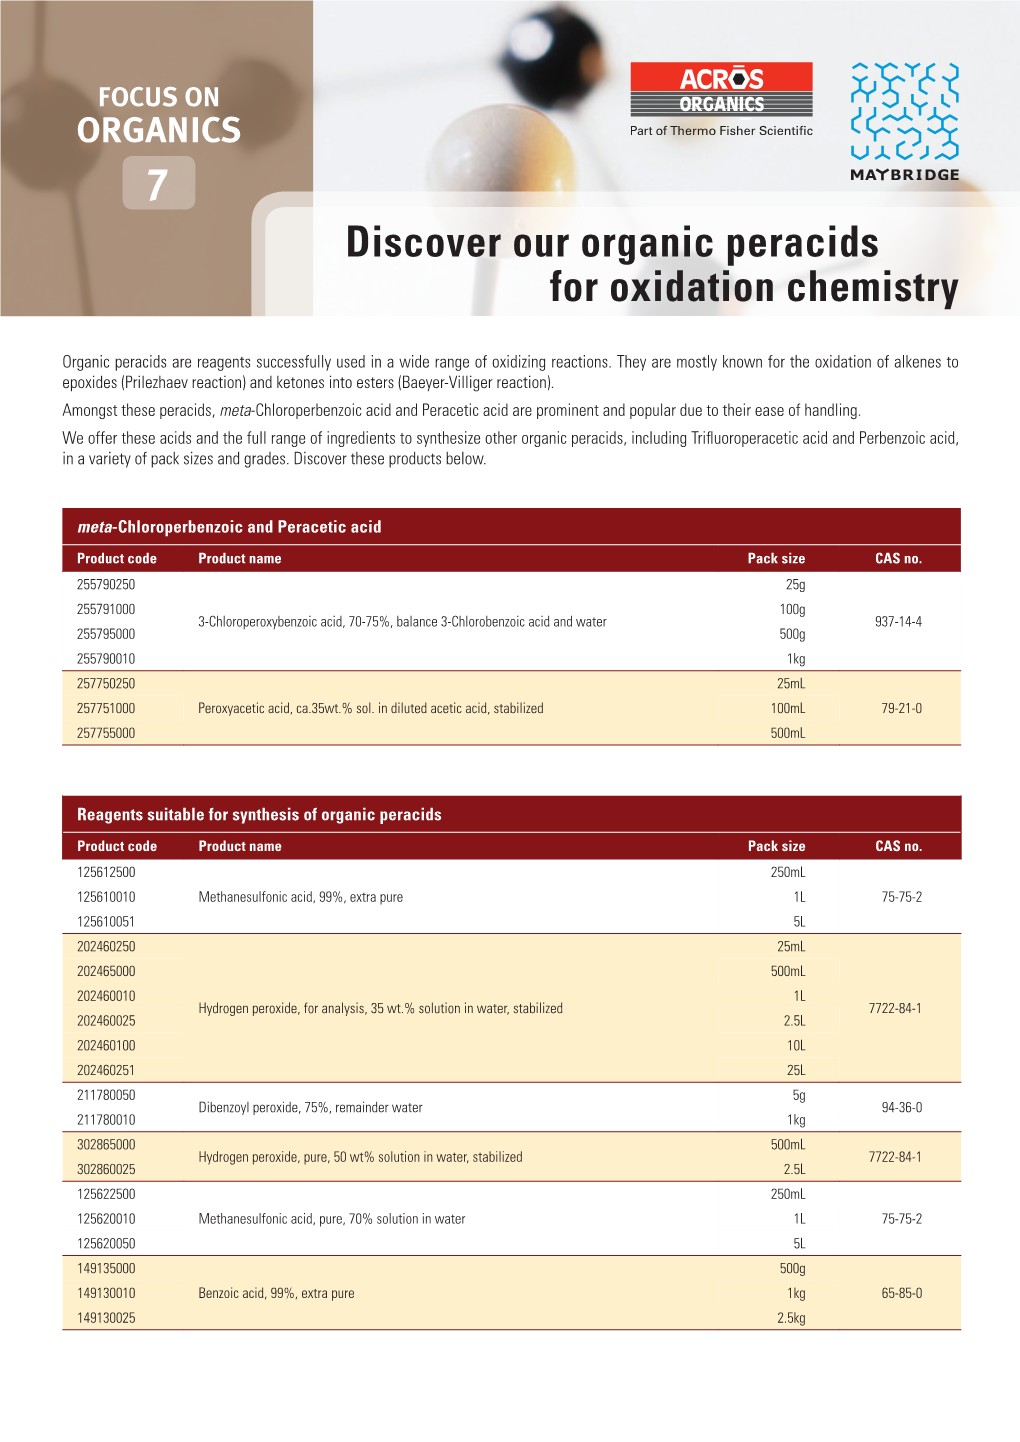 Discover Our Organic Peracids for Oxidation Chemistry